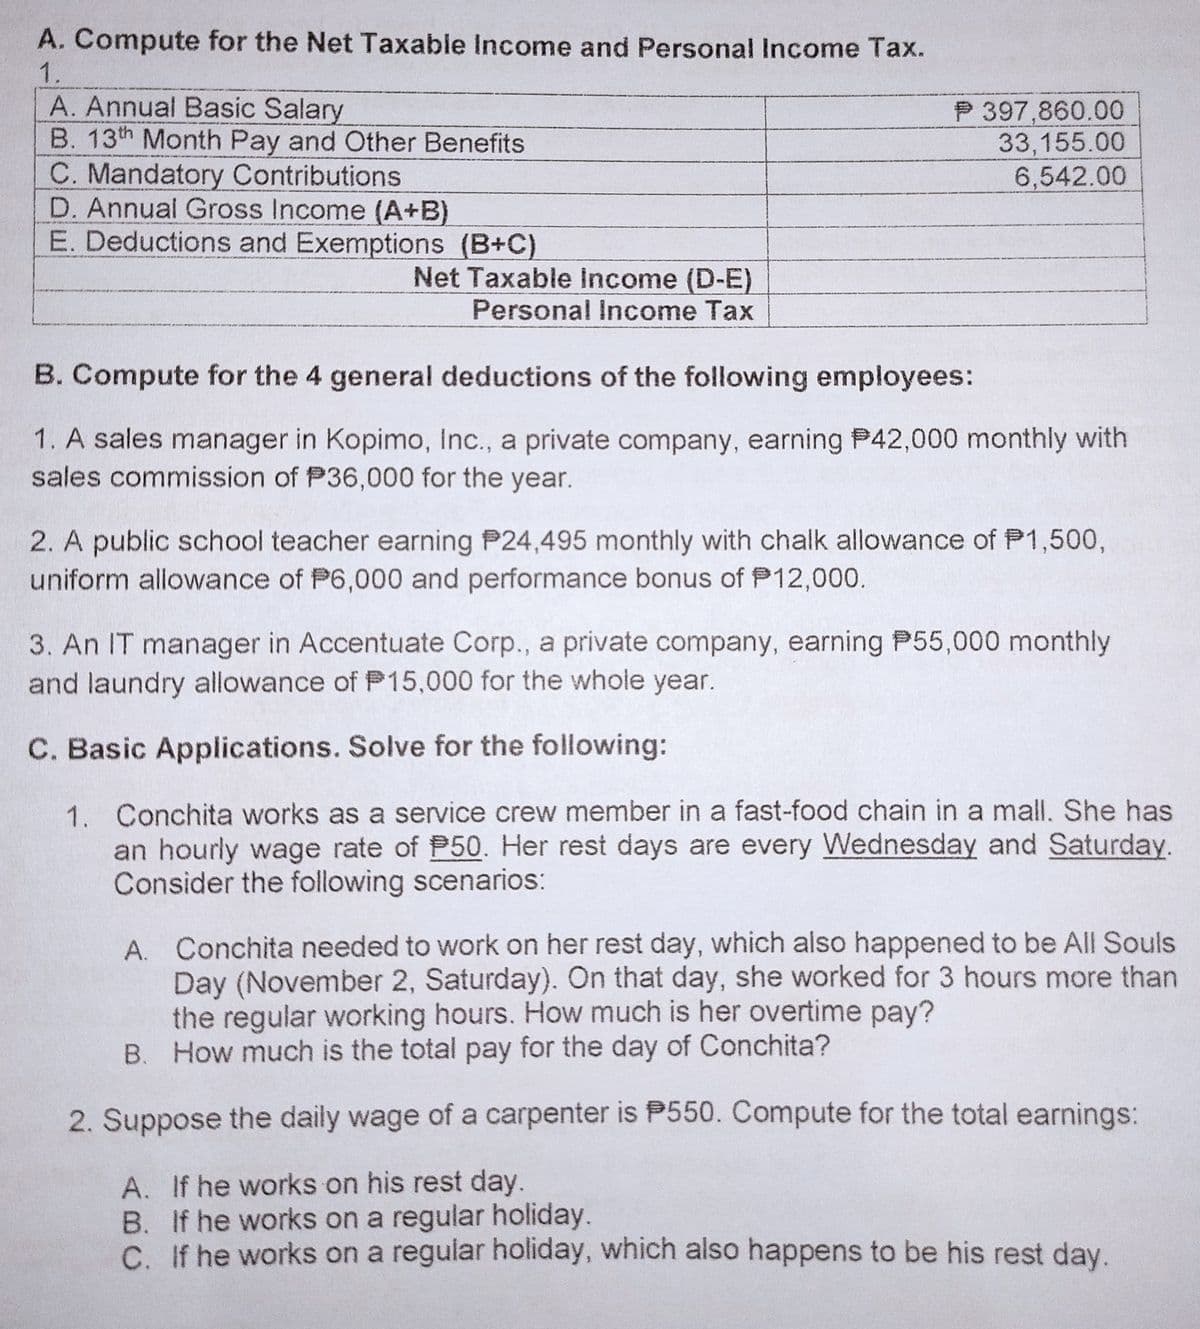 A. Compute for the Net Taxable Income and Personal Income Tax.
1.
A. Annual Basic Salary
B. 13th Month Pay and Other Benefits
C. Mandatory Contributions
D. Annual Gross Income (A+B)
E. Deductions and Exemptions (B+C)
P 397,860.00
33,155.00
6,542.00
Net Taxable income (D-E)
Personal Income Tax
B. Compute for the 4 general deductions of the following employees:
1. A sales manager in Kopimo, Inc., a private company, earning P42,000 monthly with
sales commission of P36,000 for the year.
2. A public school teacher earning P24,495 monthly with chalk allowance of P1,500,
uniform allowance of P6,000 and performance bonus of P12,000.
3. An IT manager in Accentuate Corp., a private company, earning P55,000 monthly
and laundry allowance of P15,000 for the whole year.
C. Basic Applications. Solve for the following:
1. Conchita works as a service crew member in a fast-food chain in a mall. She has
an hourly wage rate of P50. Her rest days are every Wednesday and Saturday.
Consider the following scenarios:
A. Conchita needed to work on her rest day, which also happened to be All Souls
Day (November 2, Saturday). On that day, she worked for 3 hours more than
the regular working hours. How much is her overtime pay?
B. How much is the total pay for the day of Conchita?
2. Suppose the daily wage of a carpenter is P550. Compute for the total earnings:
A. If he works on his rest day.
B. If he works on a regular holiday.
C. If he works on a regular holiday, which also happens to be his rest day.
